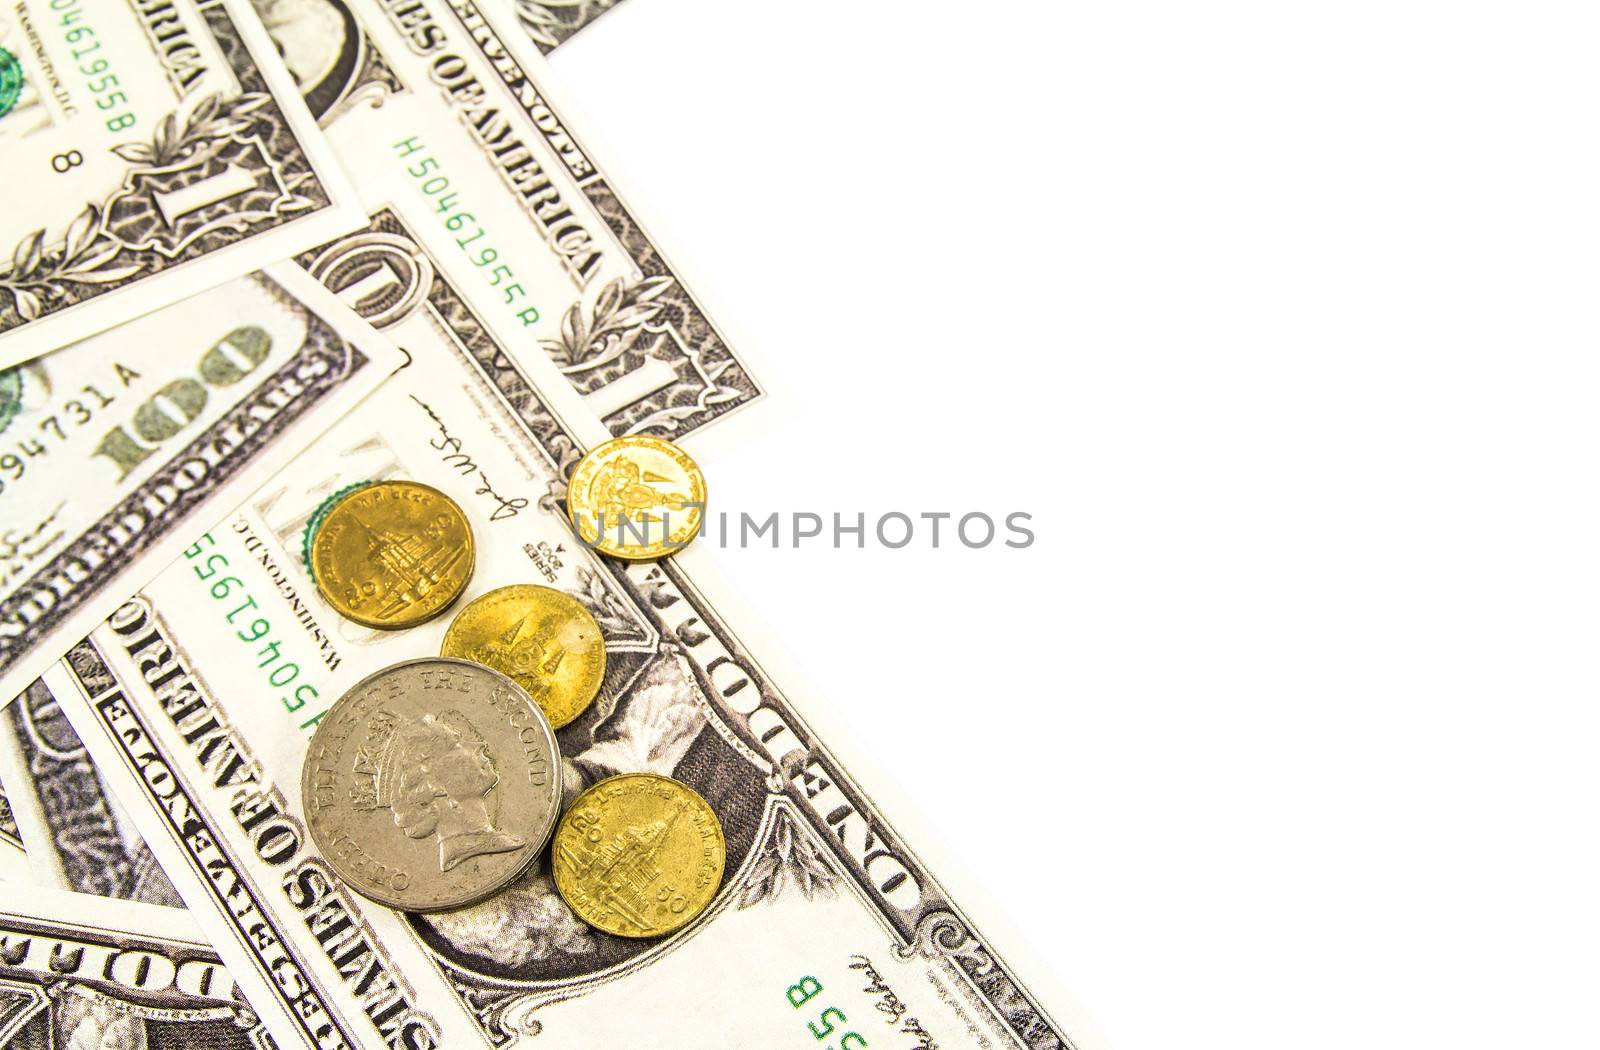 US Dollar bill and coin  isolated on white background